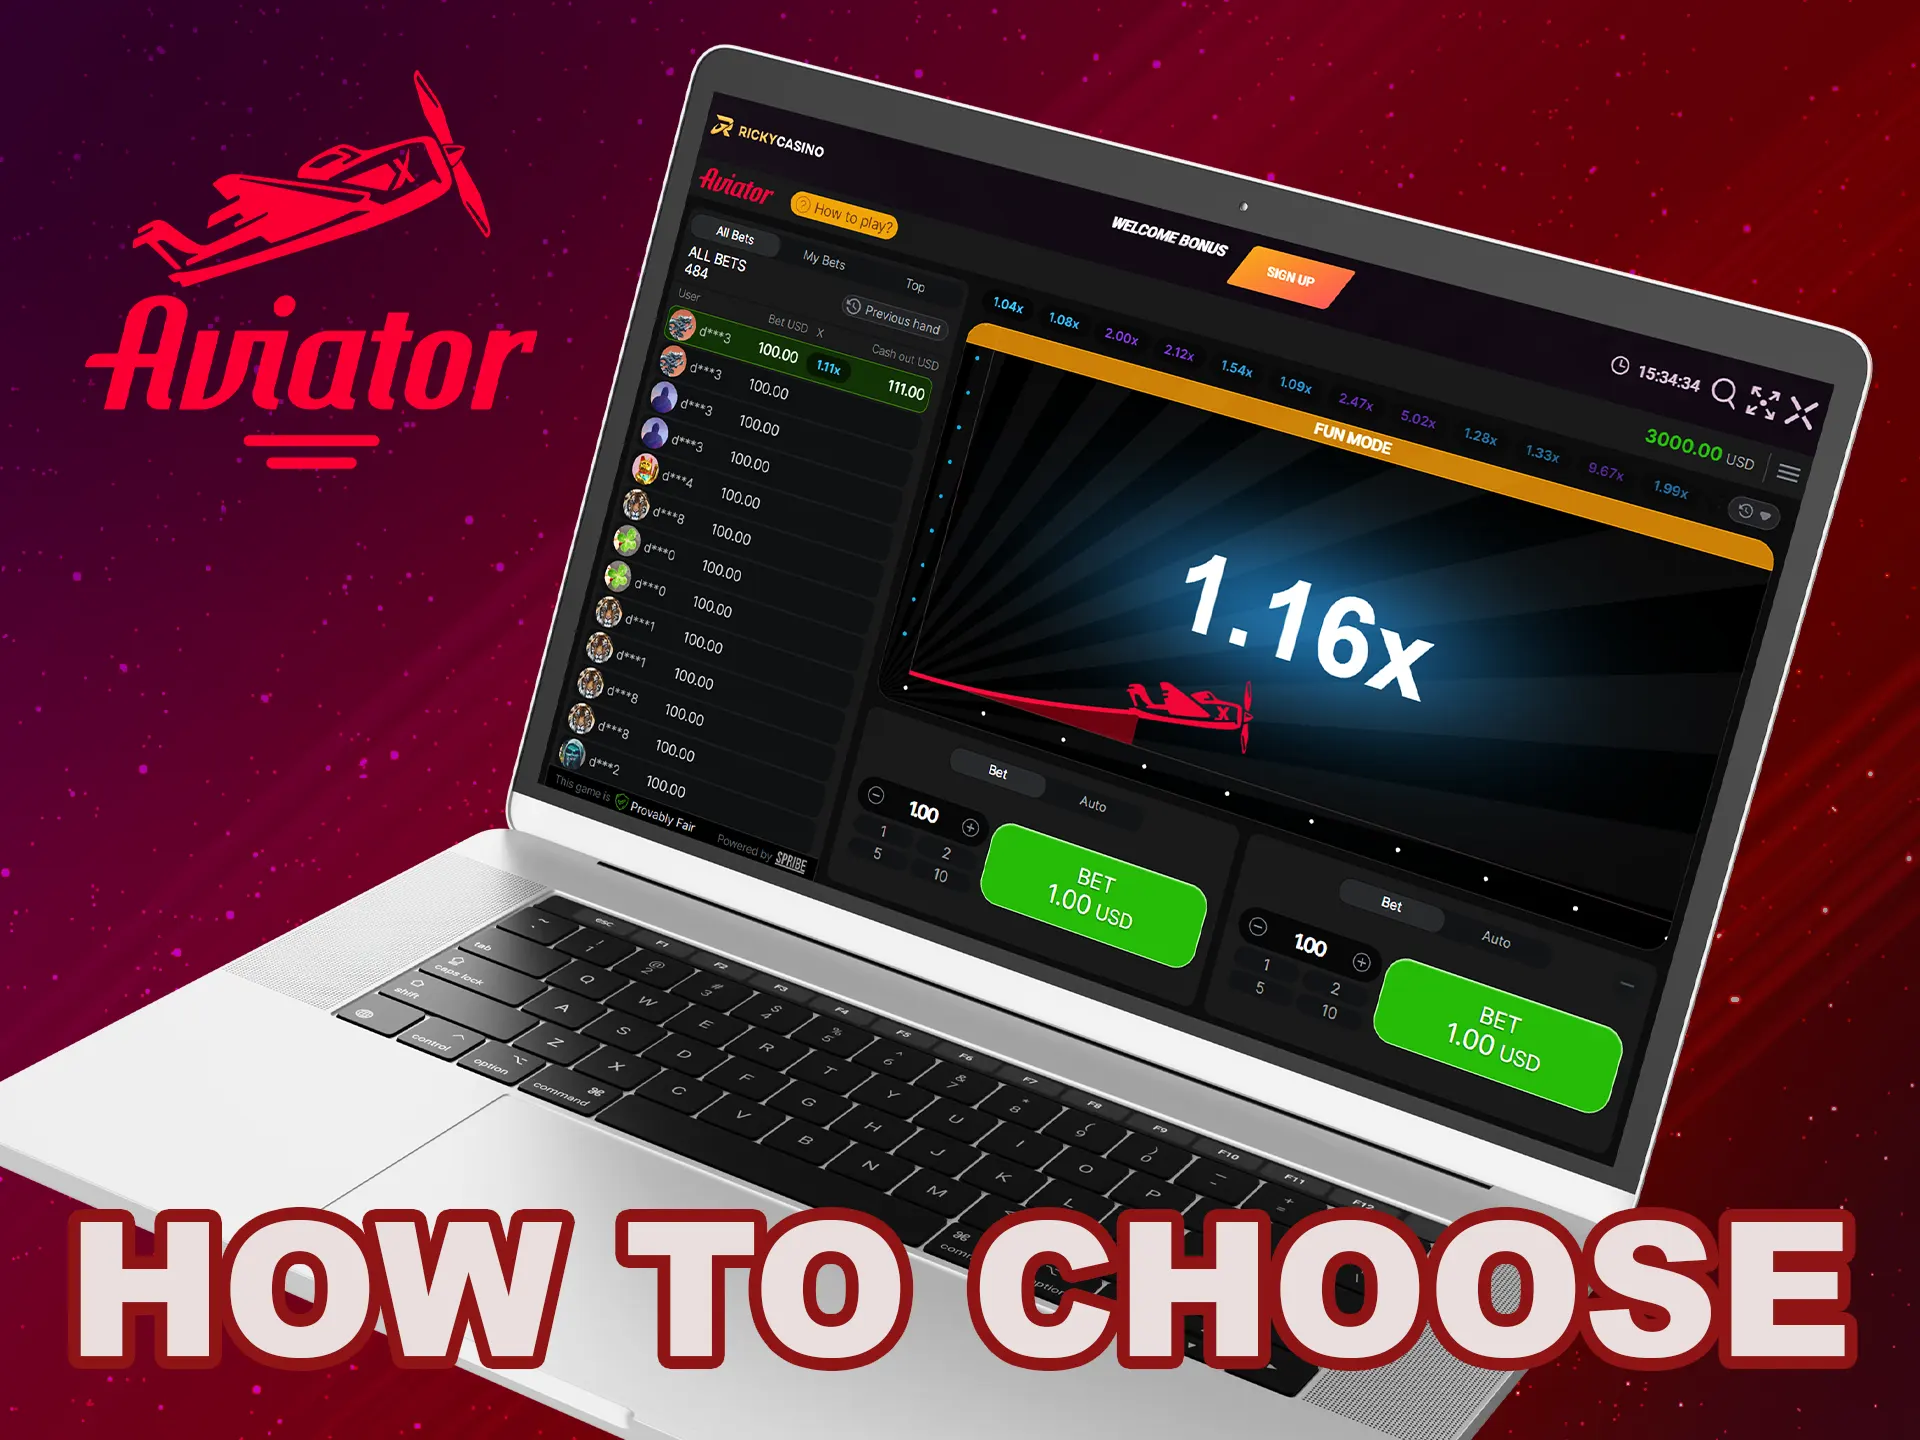 Some tips on how to choose how to choose how to choose an online casino to play Aviator.